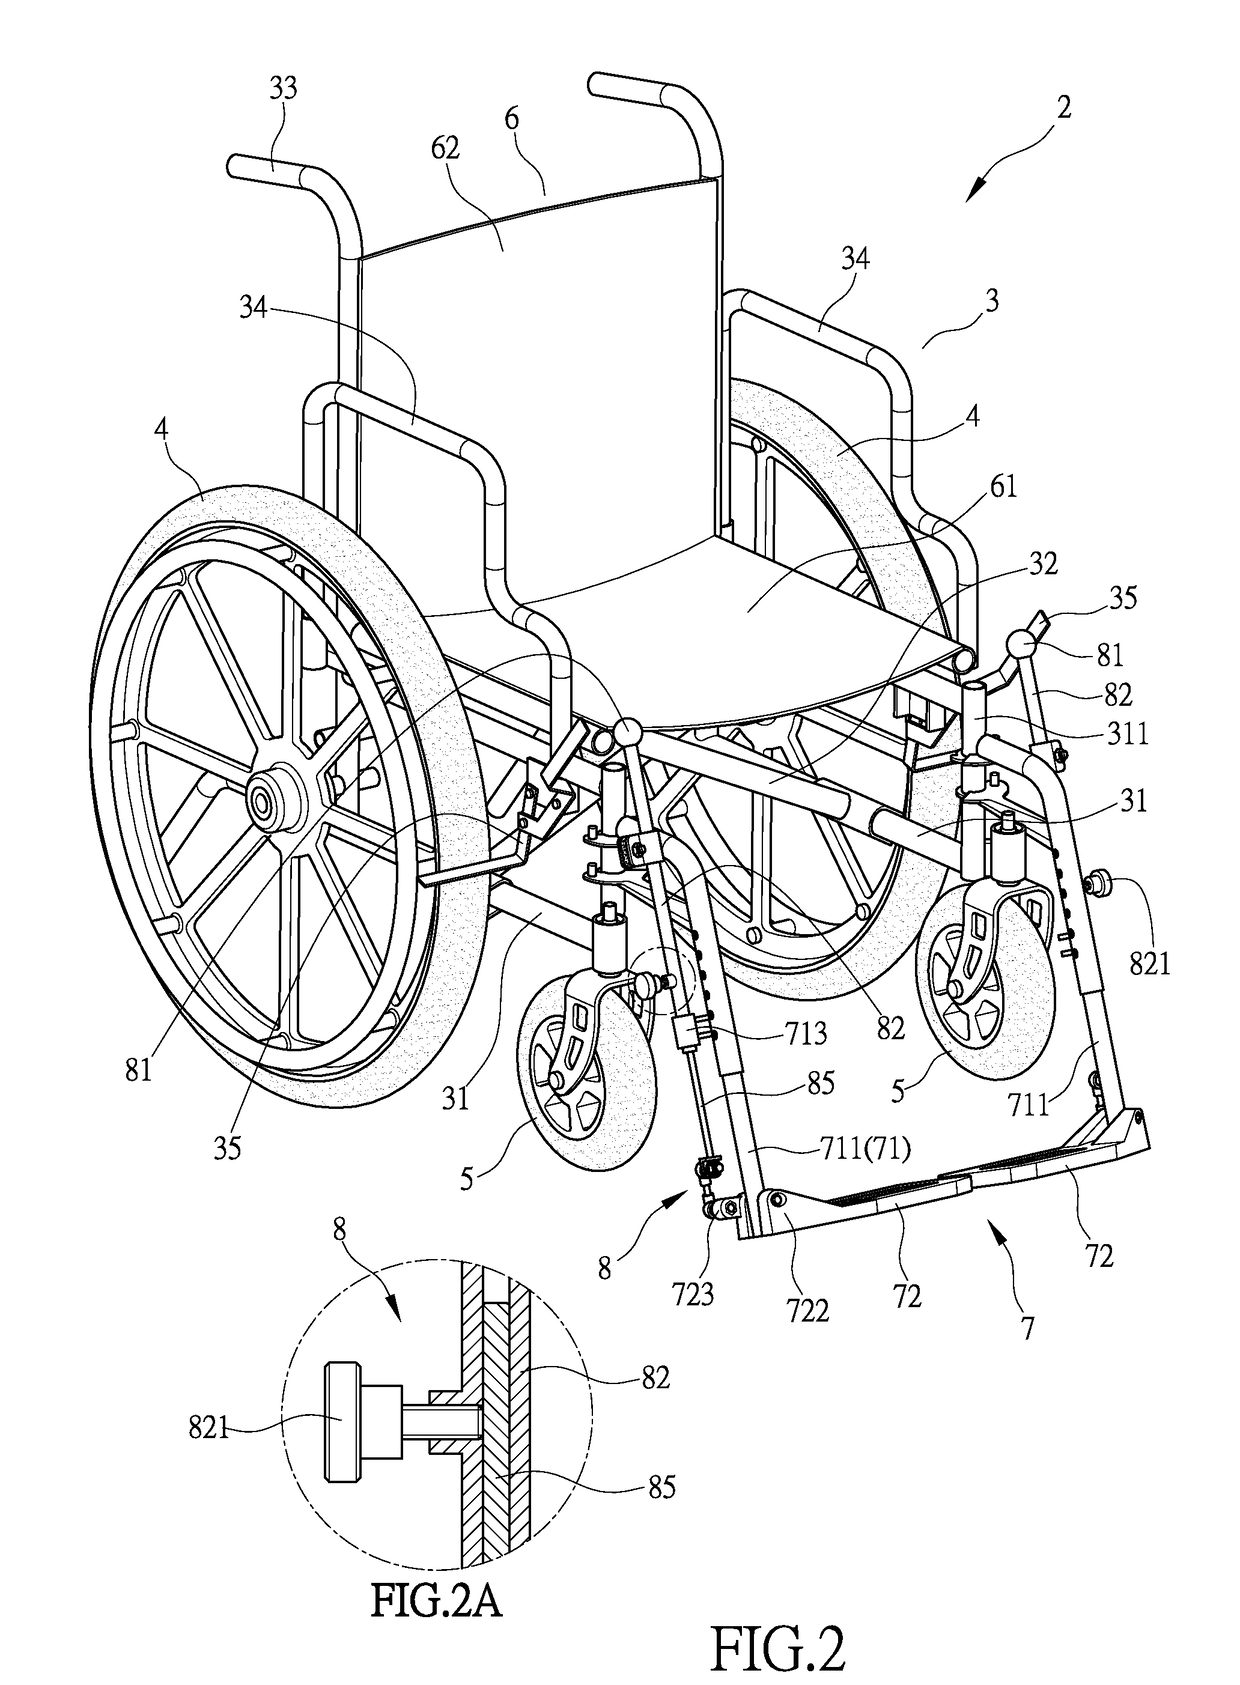 Footplate structure of wheelchair